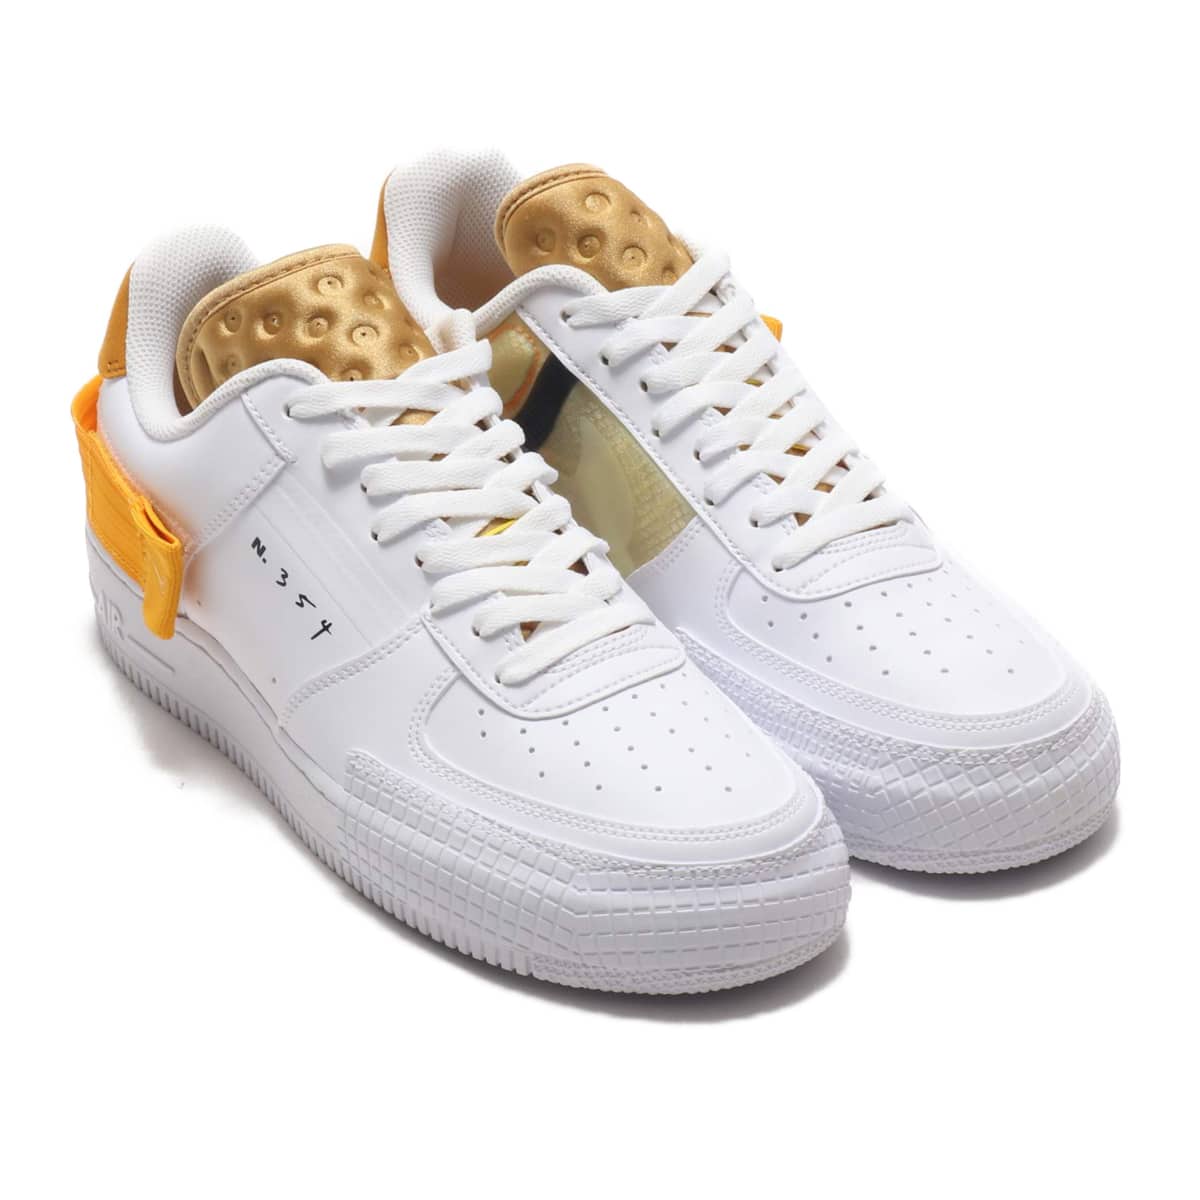 nike af1 gold and white